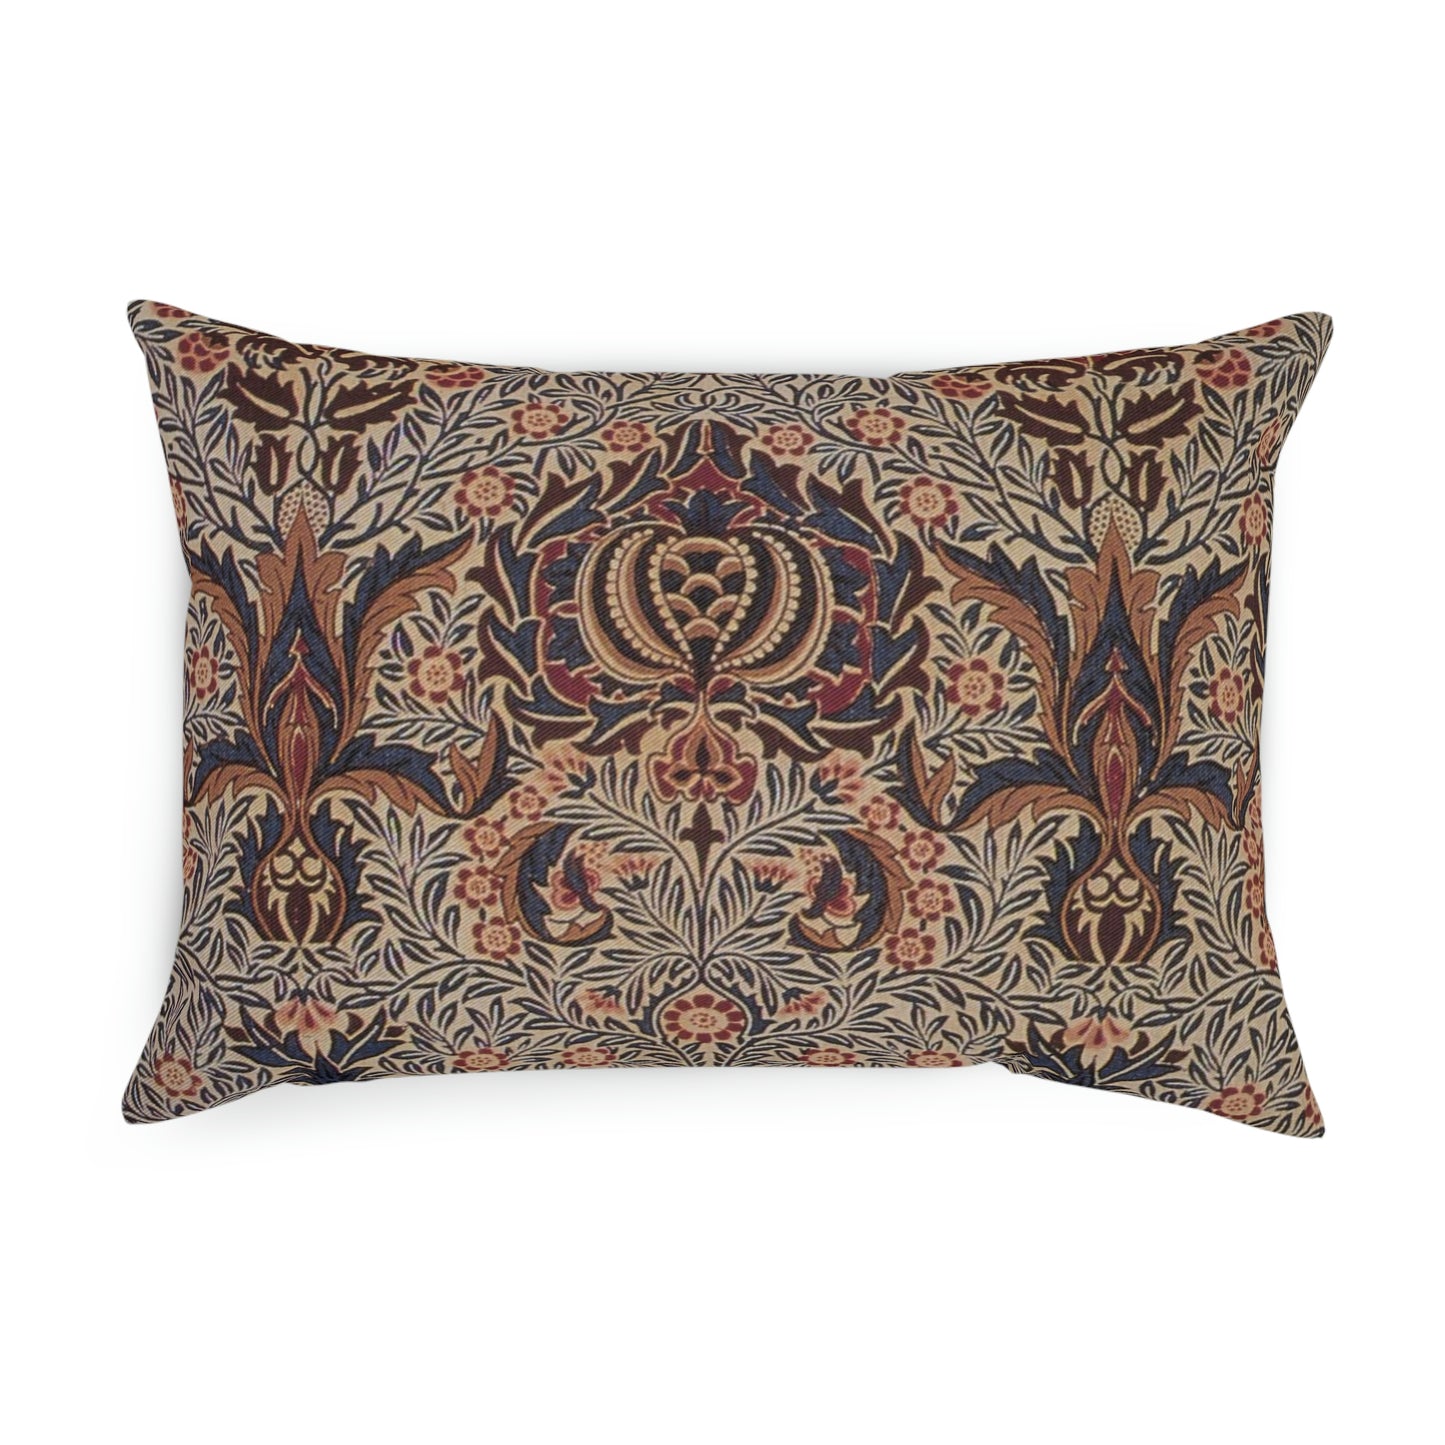 William Morris & Co Cotton Drill Cushion and Cover - Pomegranate Collection